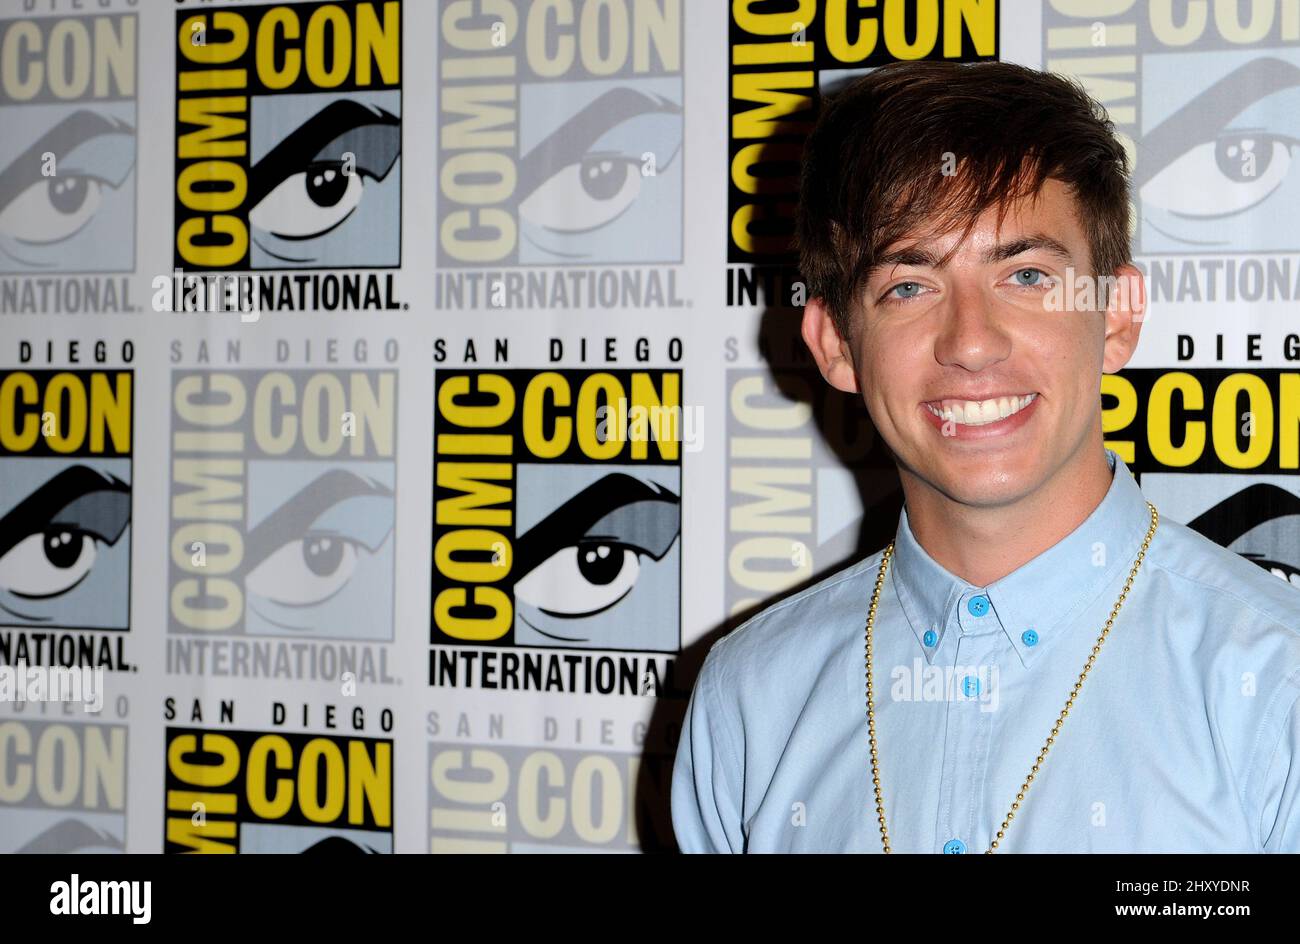 Kevin McHale 2012 Comic Con - Day 3 'Glee' Photo Op held at the Bayfront Hilton Stock Photo